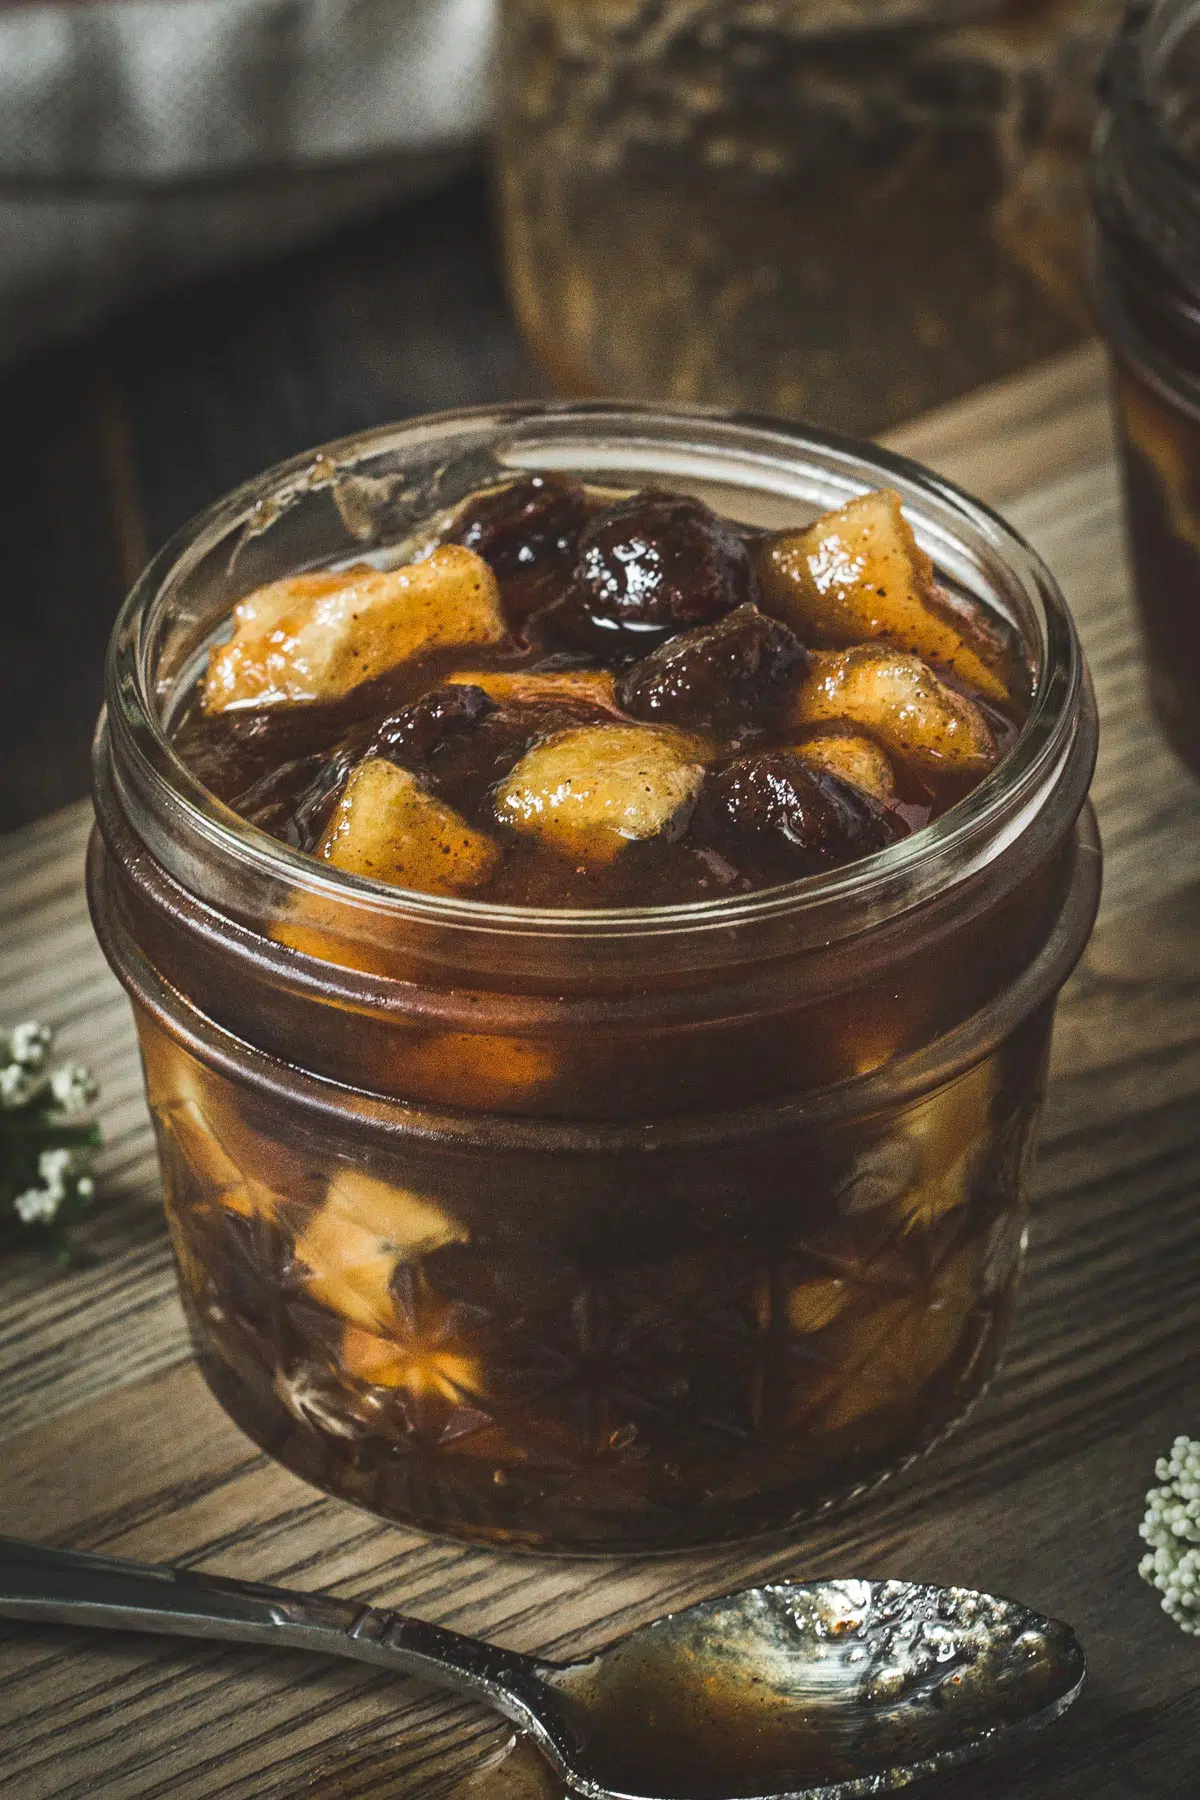 Apple jam with raisins and real chunks of apple in a glass jar.